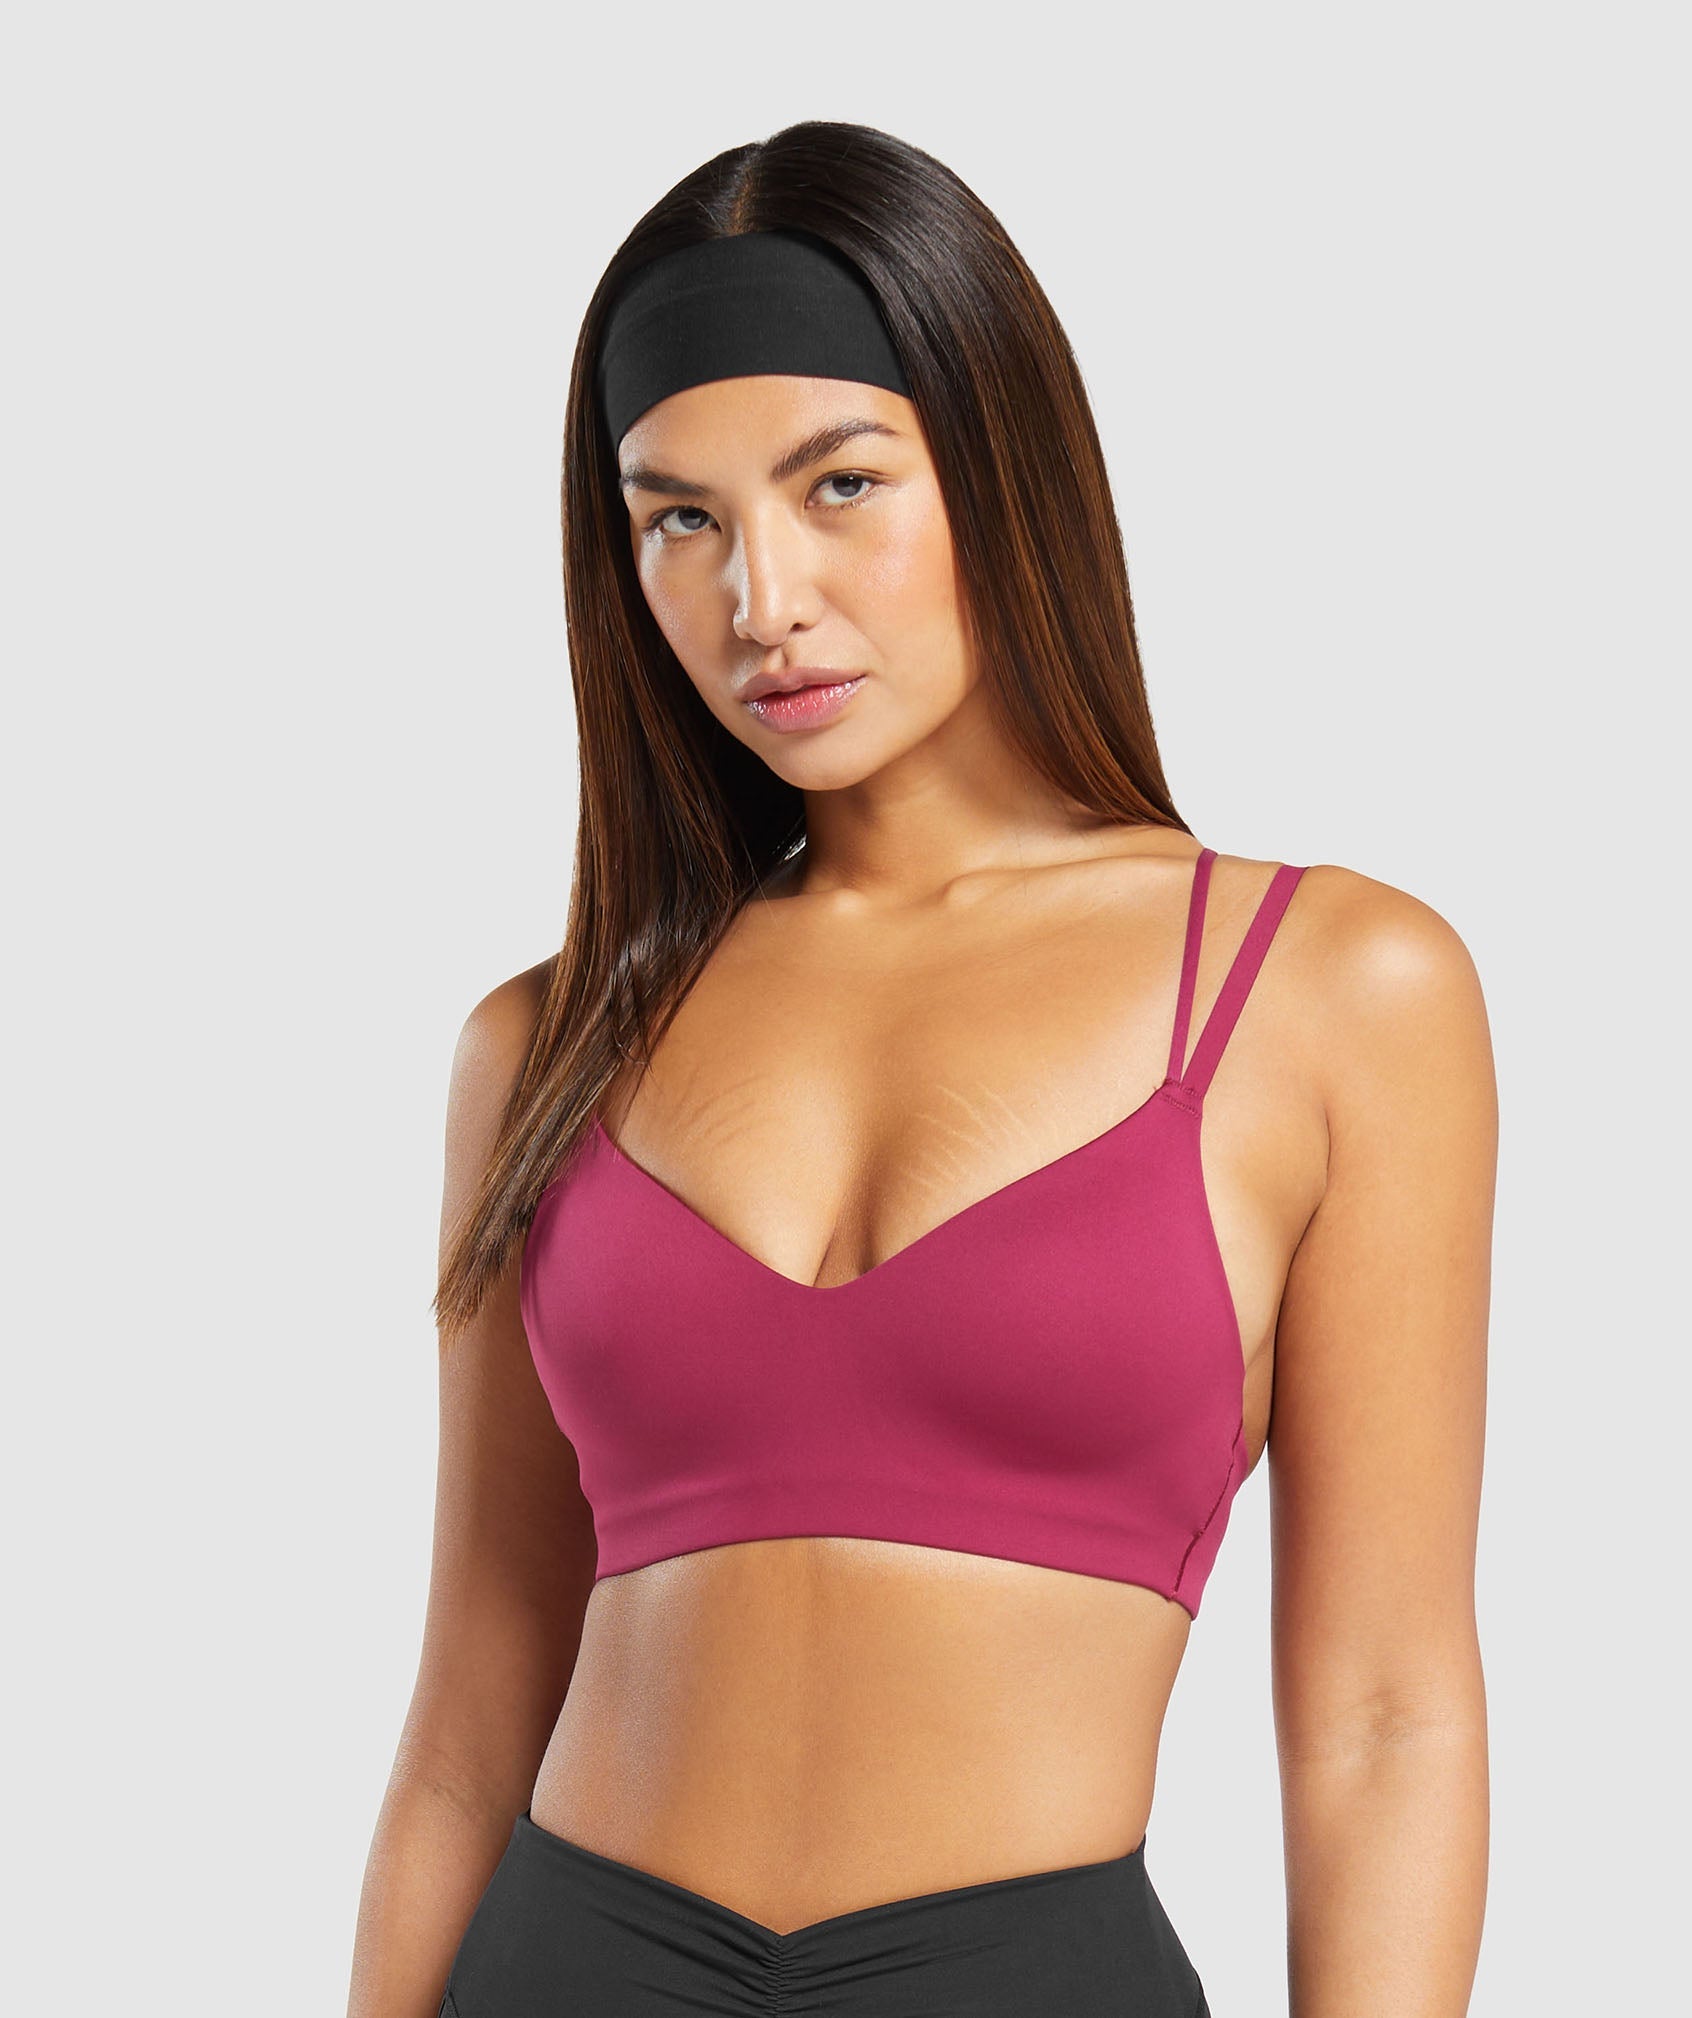 Brand New Torrid Strappy Back Wicking Active Sports Bra - Arrow Print Pink